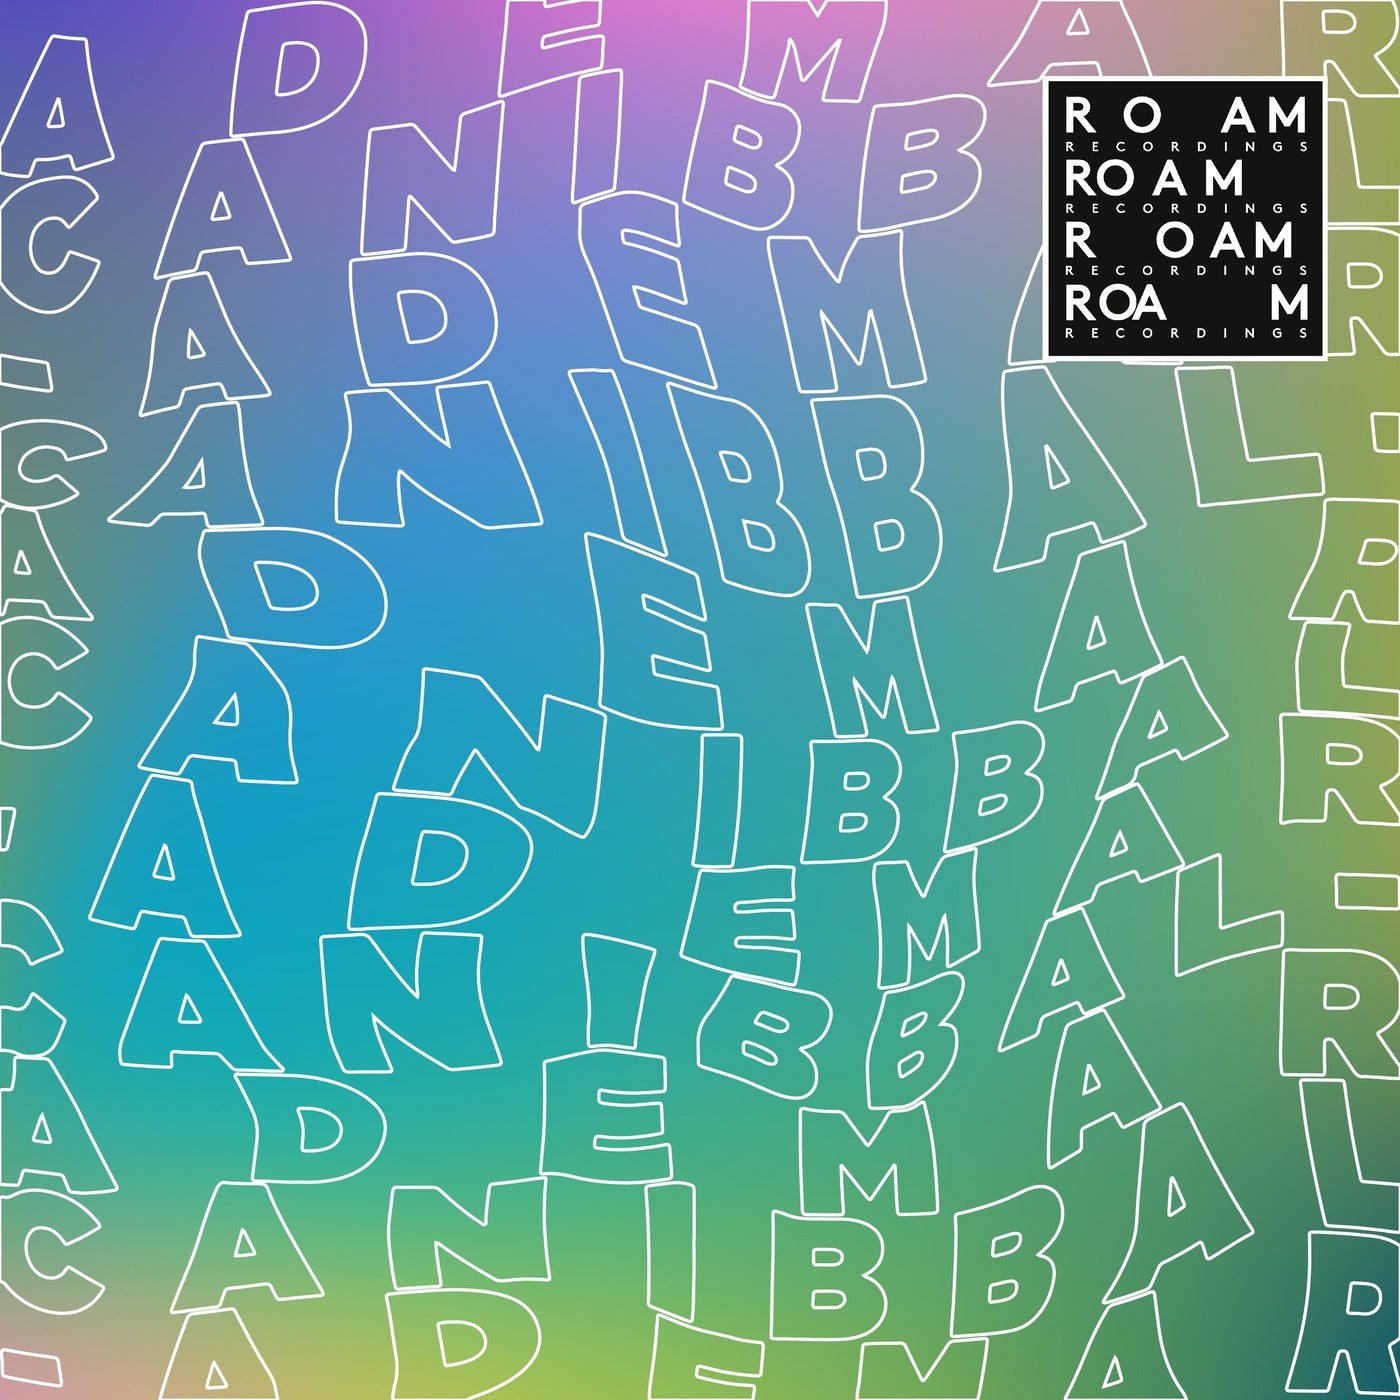 image cover: Ademarr - Canibbal / ROM097